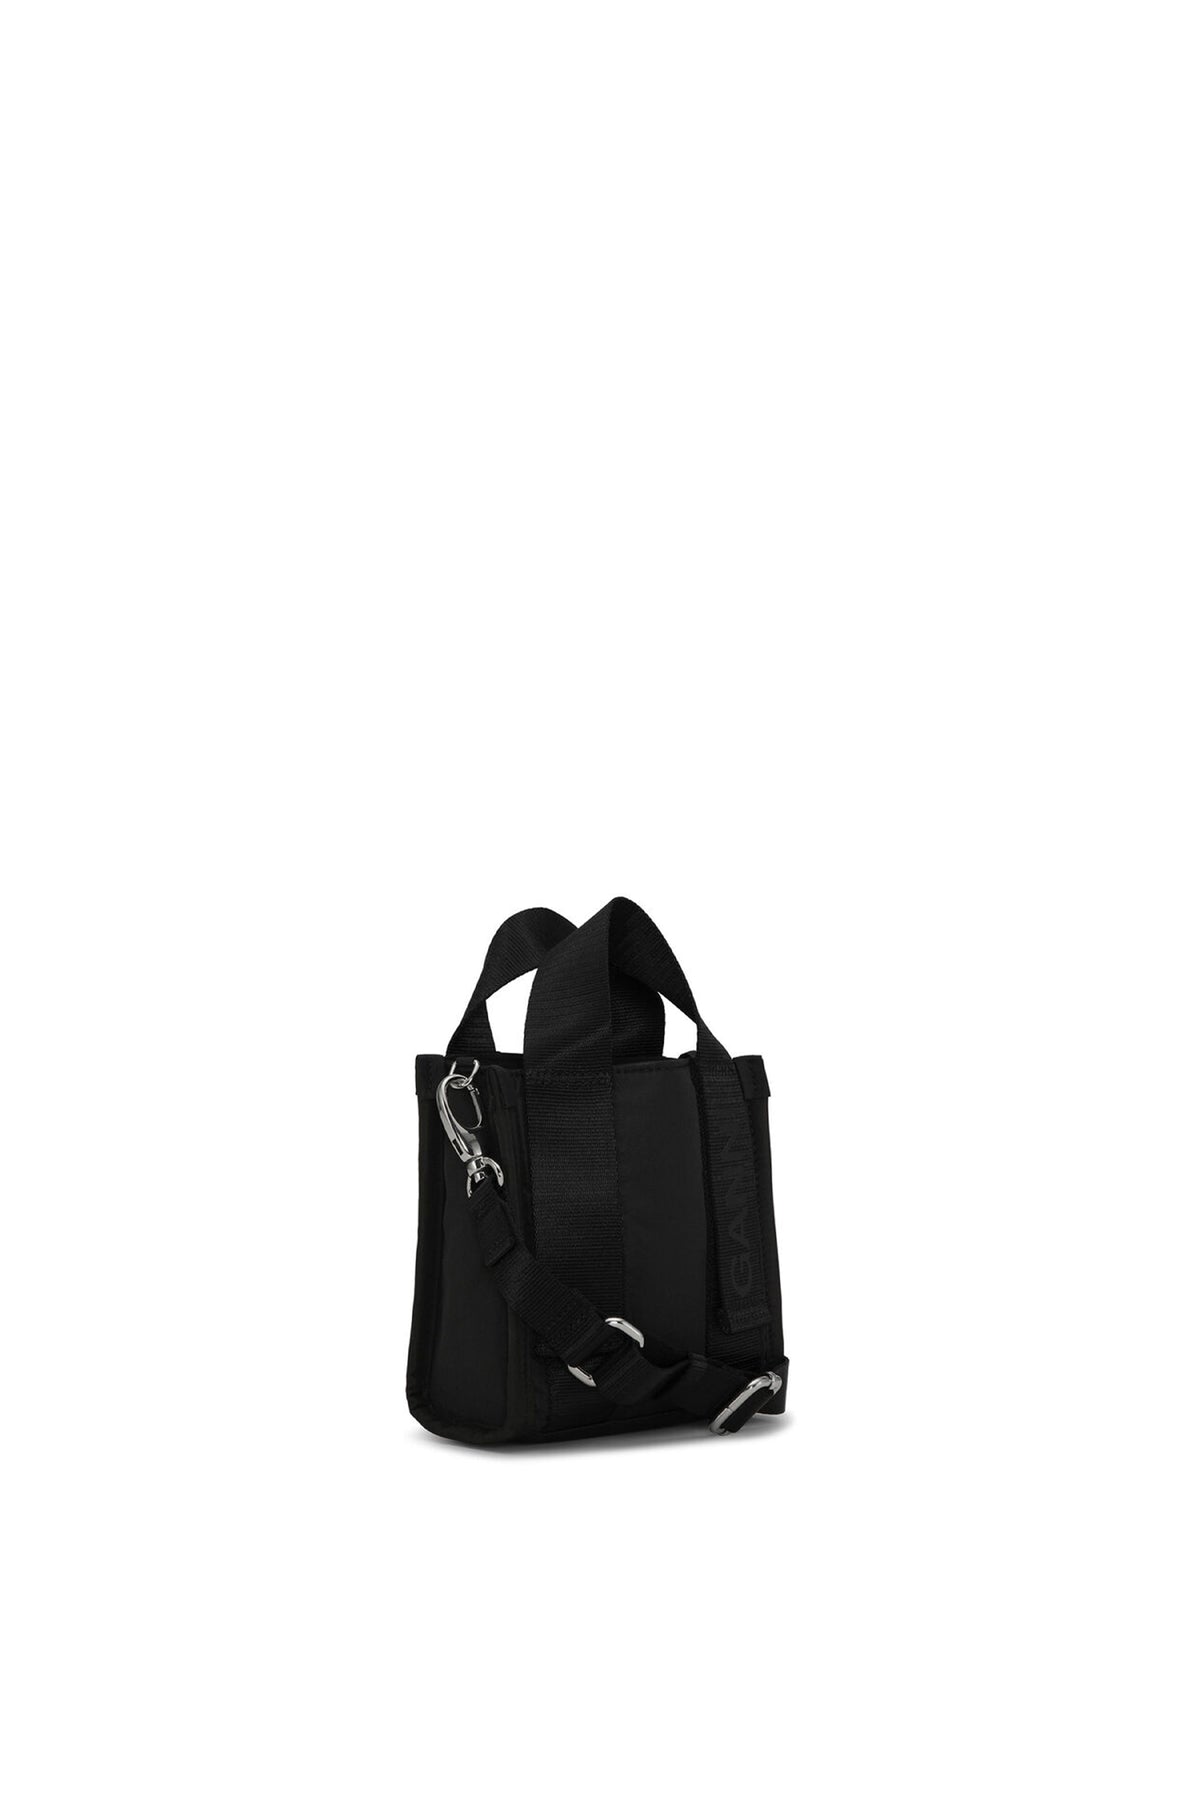 RECYCLED MINI TOTE / BLK